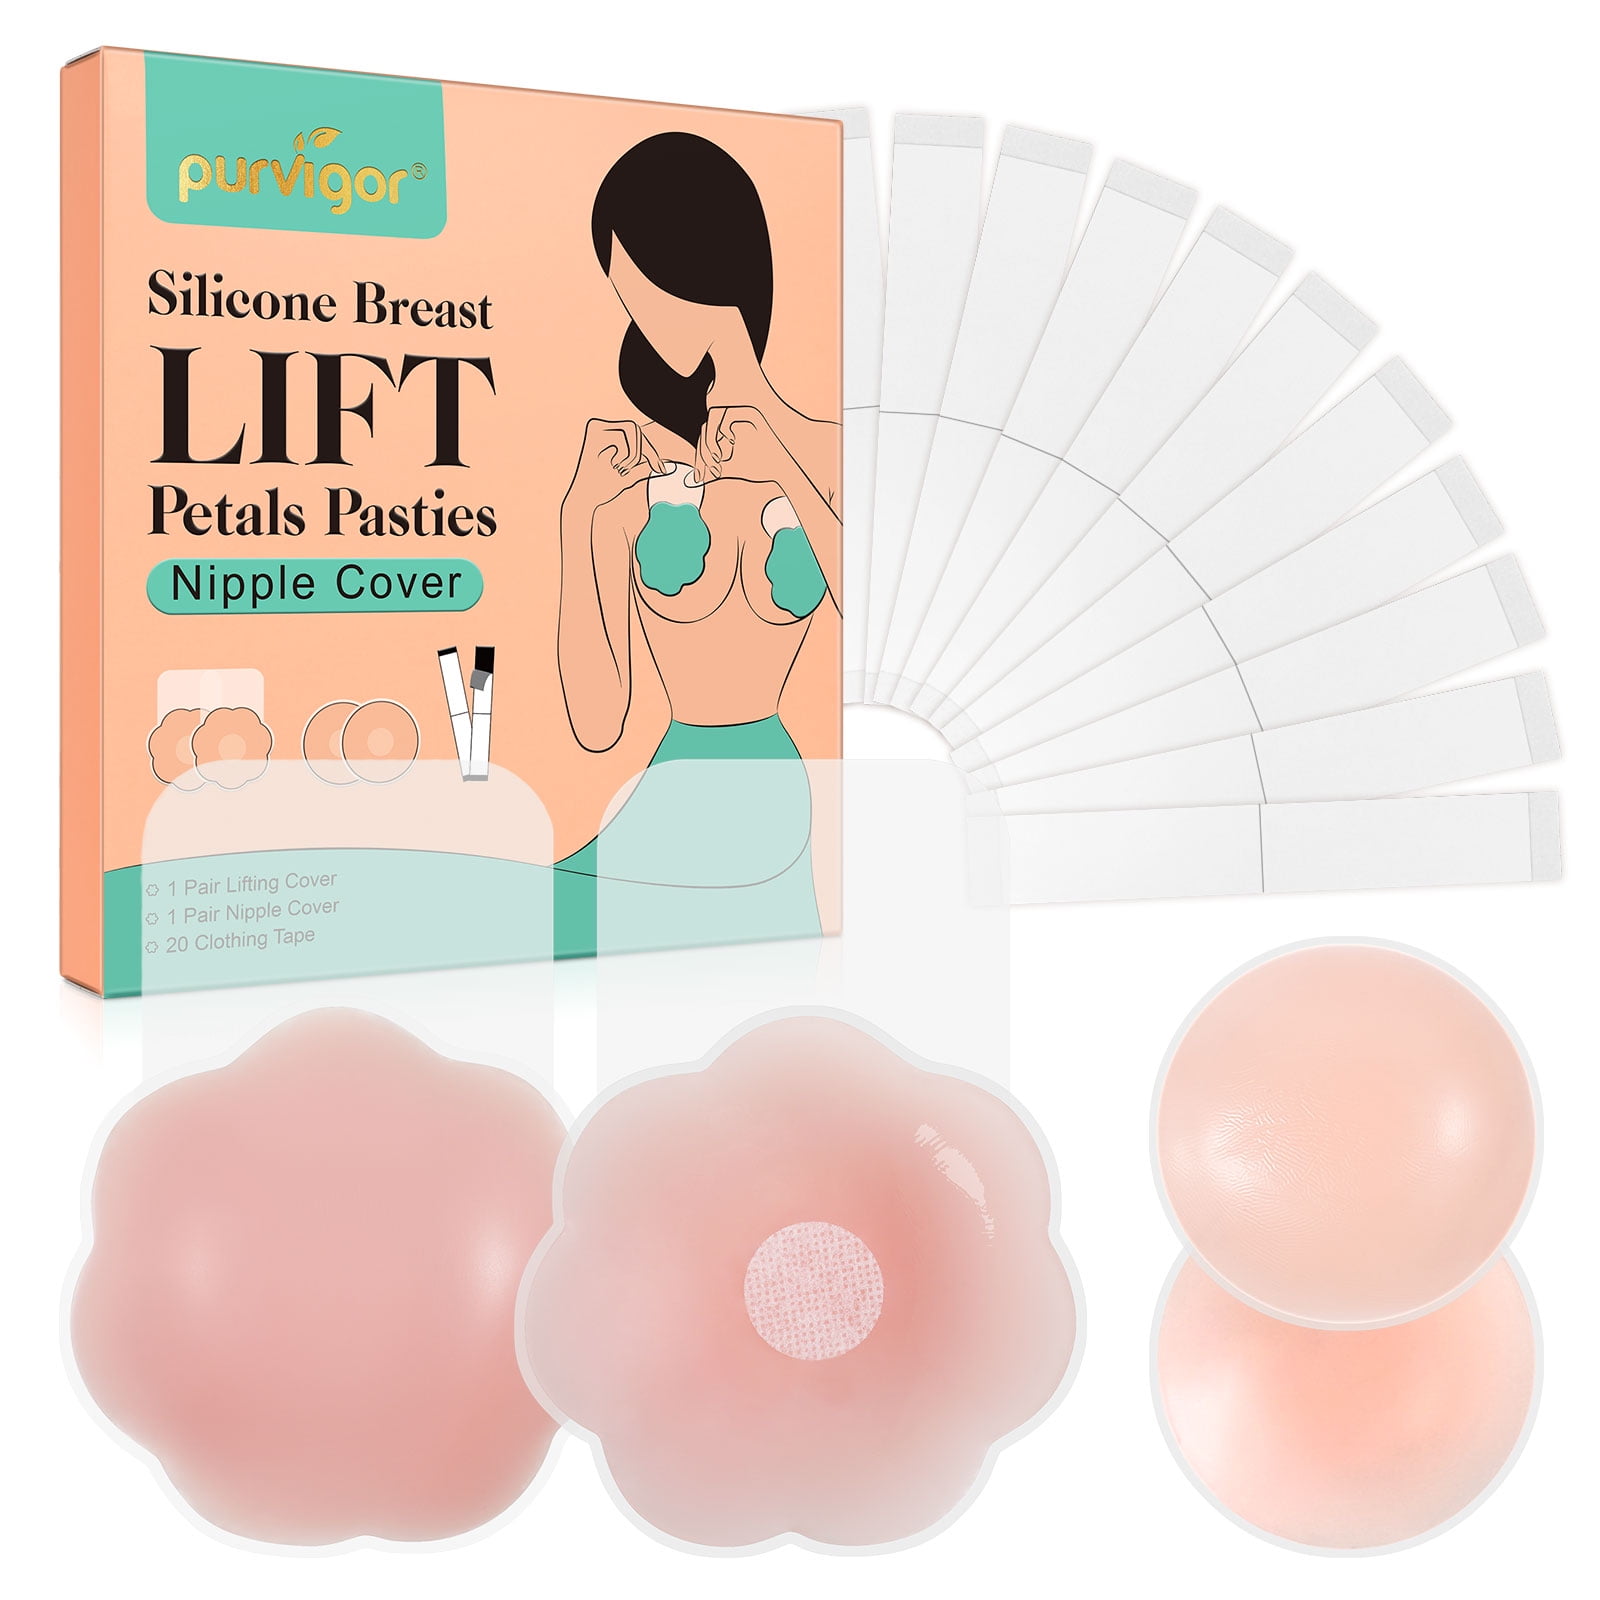 Purvigor Silicone Breast Lift Petals Pasties Nipple Cover with 20 Clothing  Tape